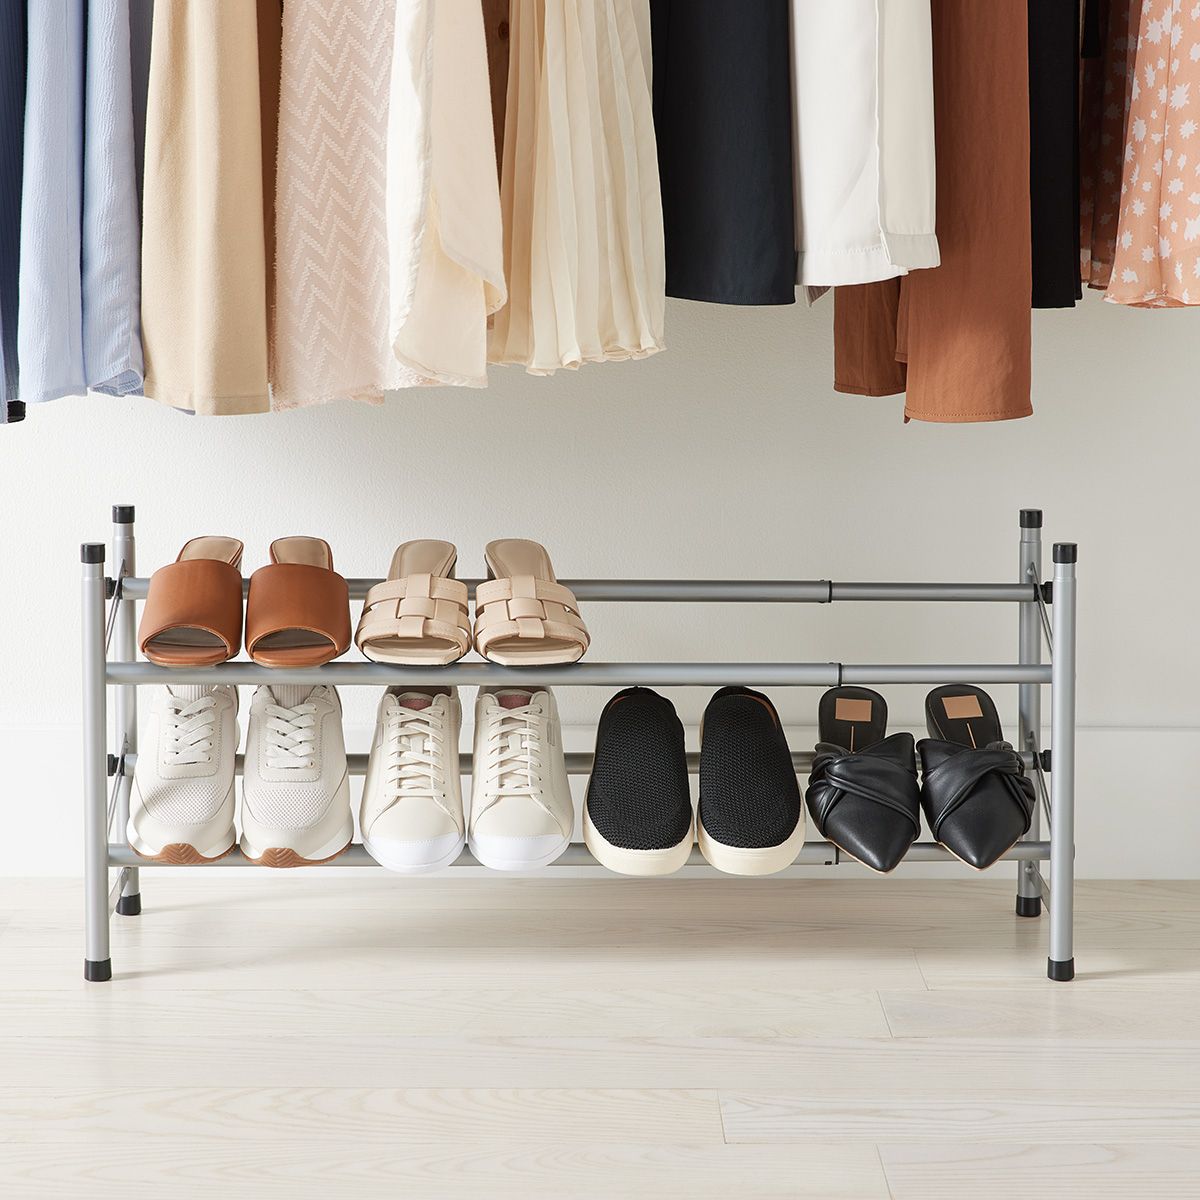 Platinum 2 Tier Adjustable Shoe Rack | The Container Store With Regard To 2 Tier Adjustable Wardrobes (View 5 of 15)